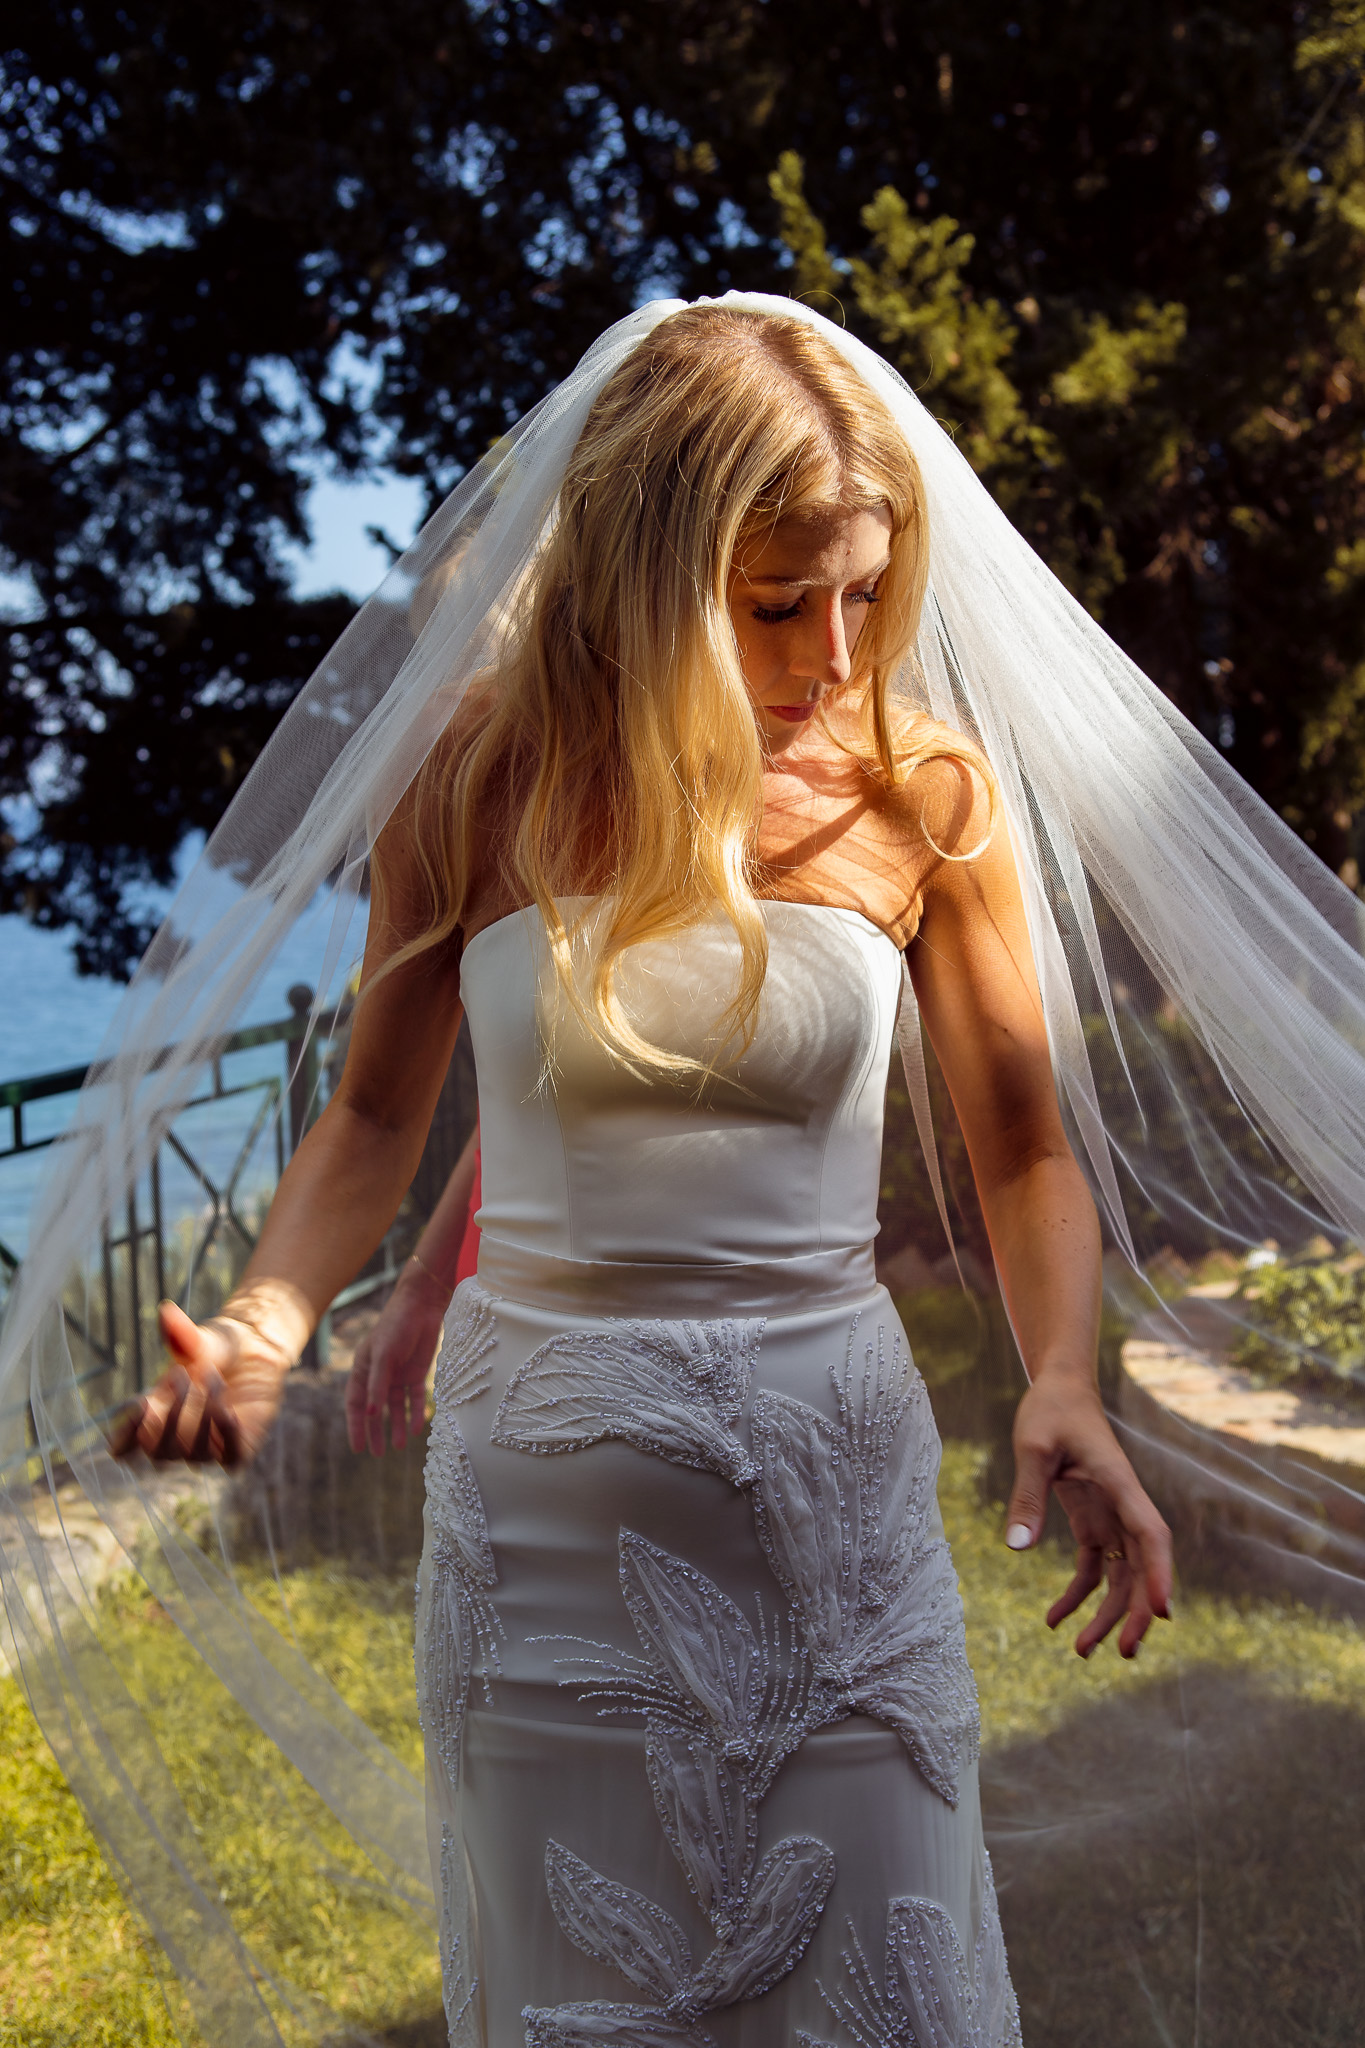 Alice poses in her wedding dress and veil at her villa in Crete before heading to her wedding.